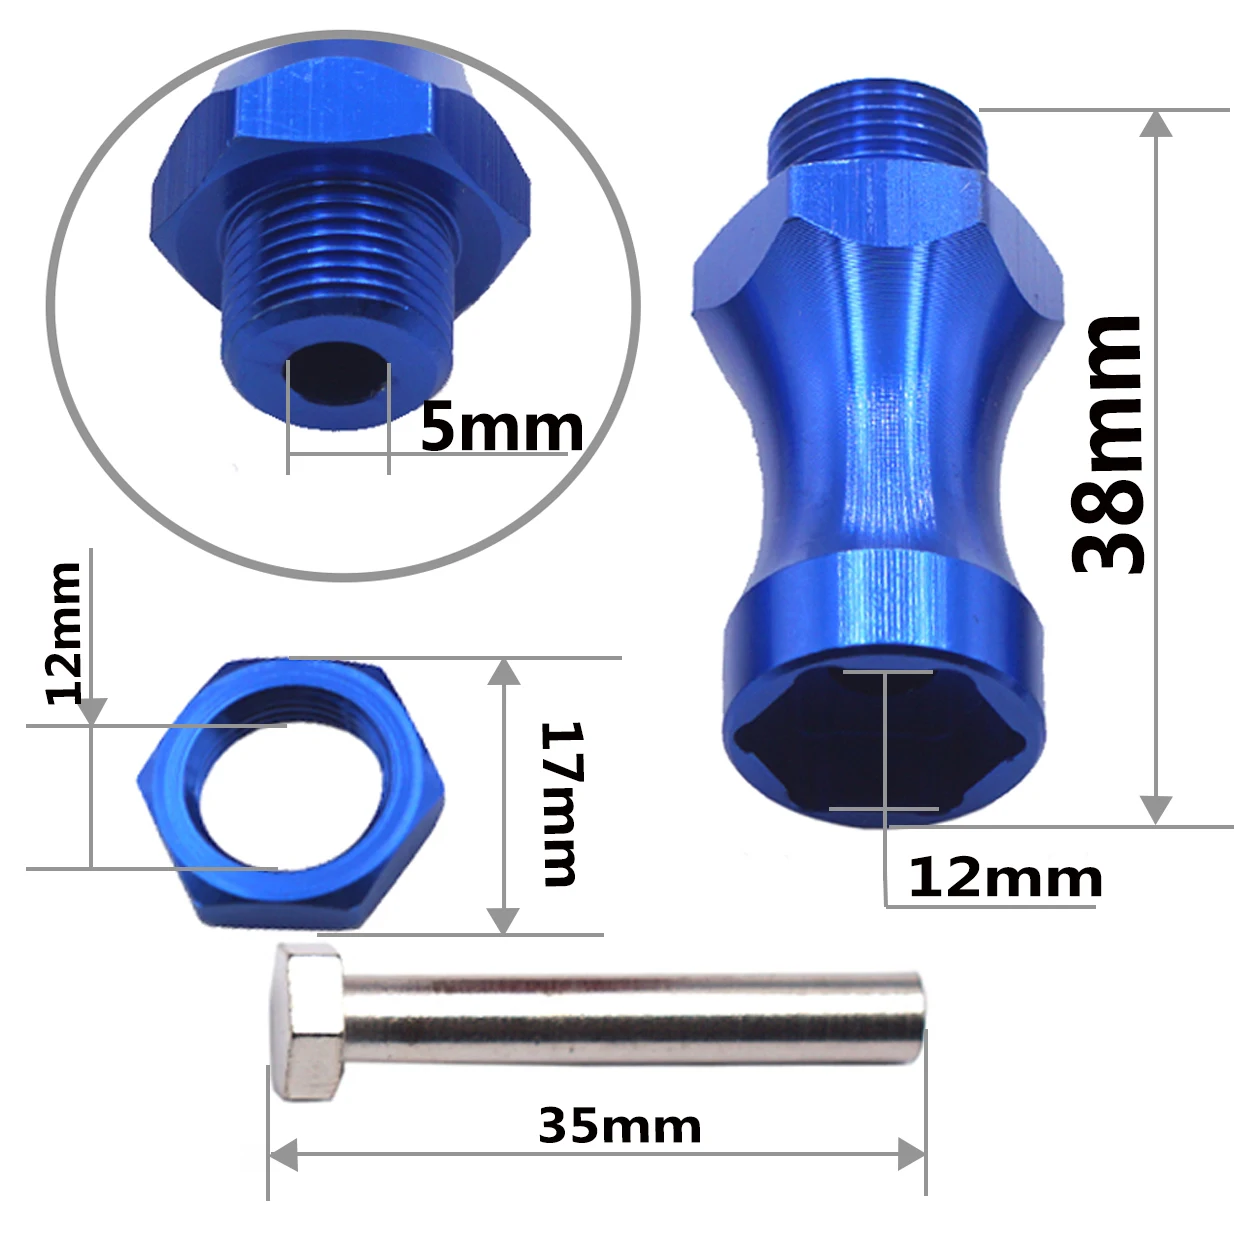 4Pack Aluminum 12mm to 17mm Wheel Extension Hex Drive Hub Adapter Widener 30mm Offset for Tamiya Axial RC4WD Traxxas 1/10 ,Blue images - 6